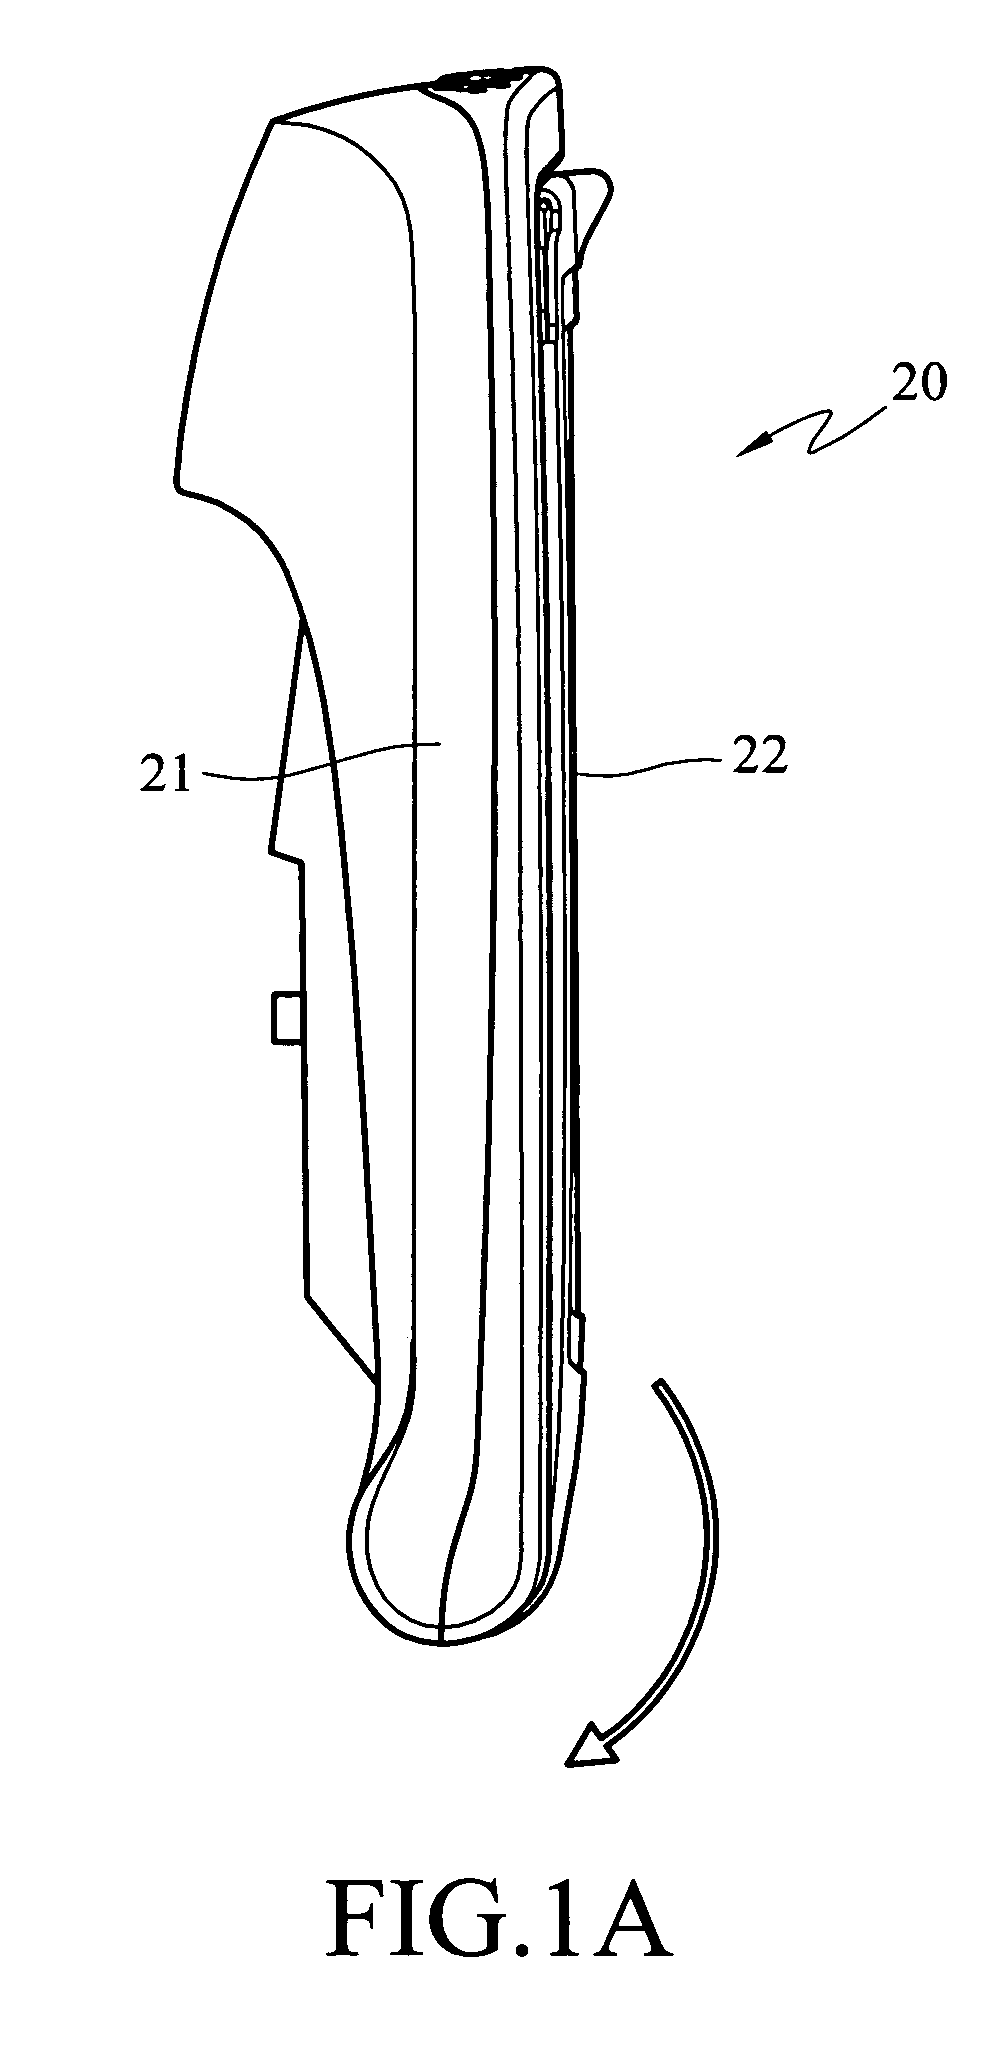 Axle positioning structure